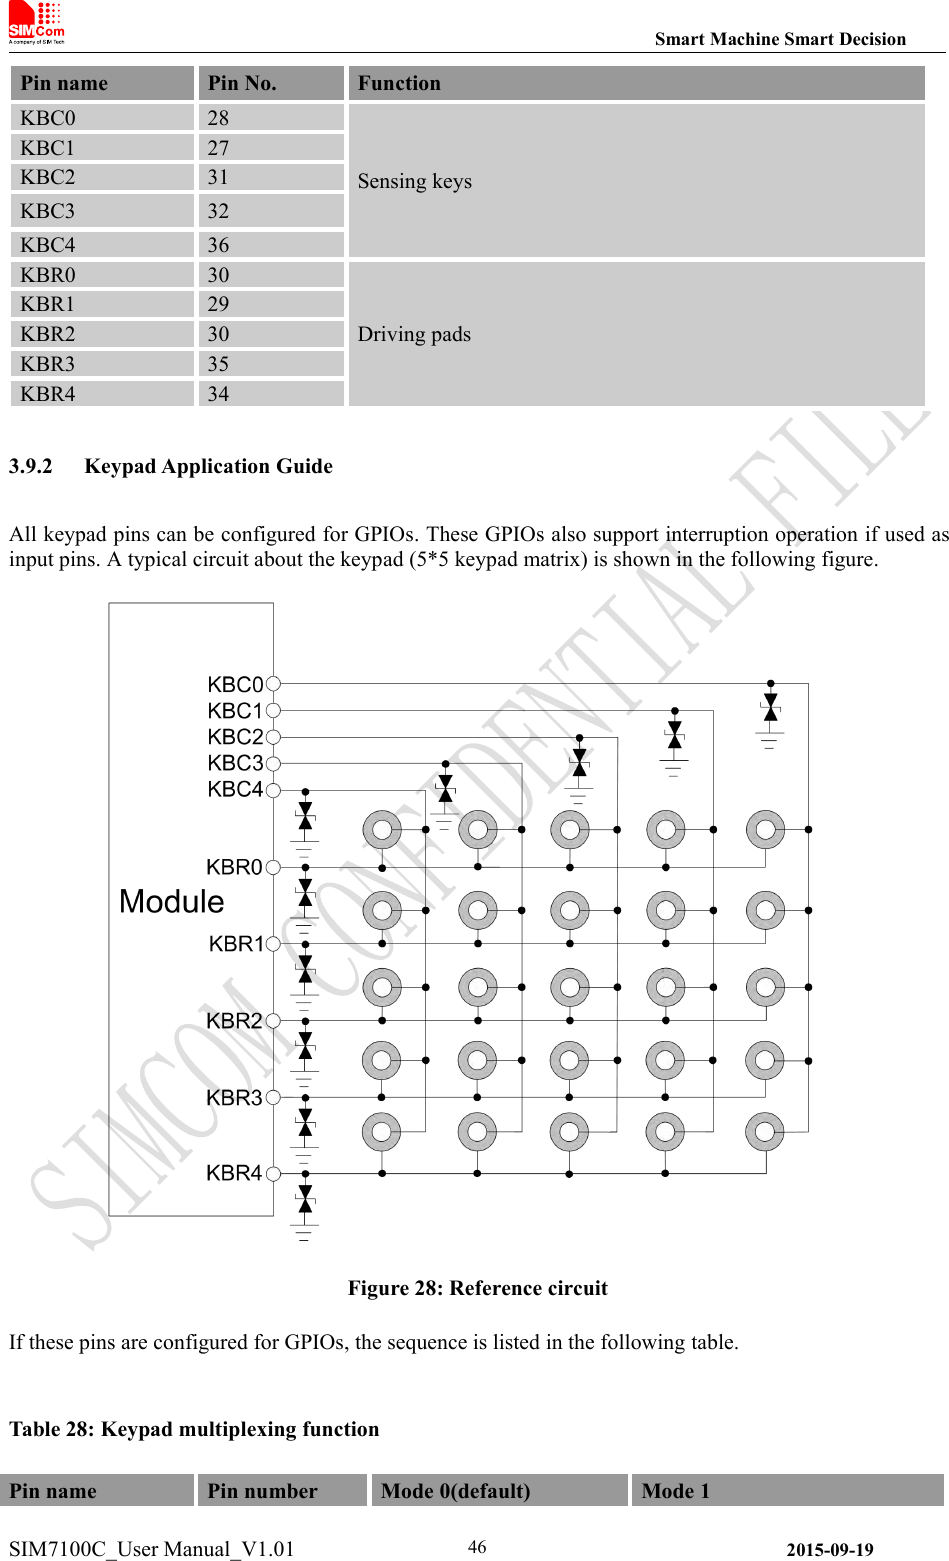 Smart Machine Smart DecisionSIM7100C_User Manual_V1.01 2015-09-1946Pin namePin No.FunctionKBC028Sensing keysKBC127KBC231KBC332KBC436KBR030Driving padsKBR129KBR230KBR335KBR4343.9.2 Keypad Application GuideAll keypad pins can be configured for GPIOs. These GPIOs also support interruption operation if used asinput pins. A typical circuit about the keypad (5*5 keypad matrix) is shown in the following figure.Figure 28: Reference circuitIf these pins are configured for GPIOs, the sequence is listed in the following table.Table 28: Keypad multiplexing functionPin namePin numberMode 0(default)Mode 1